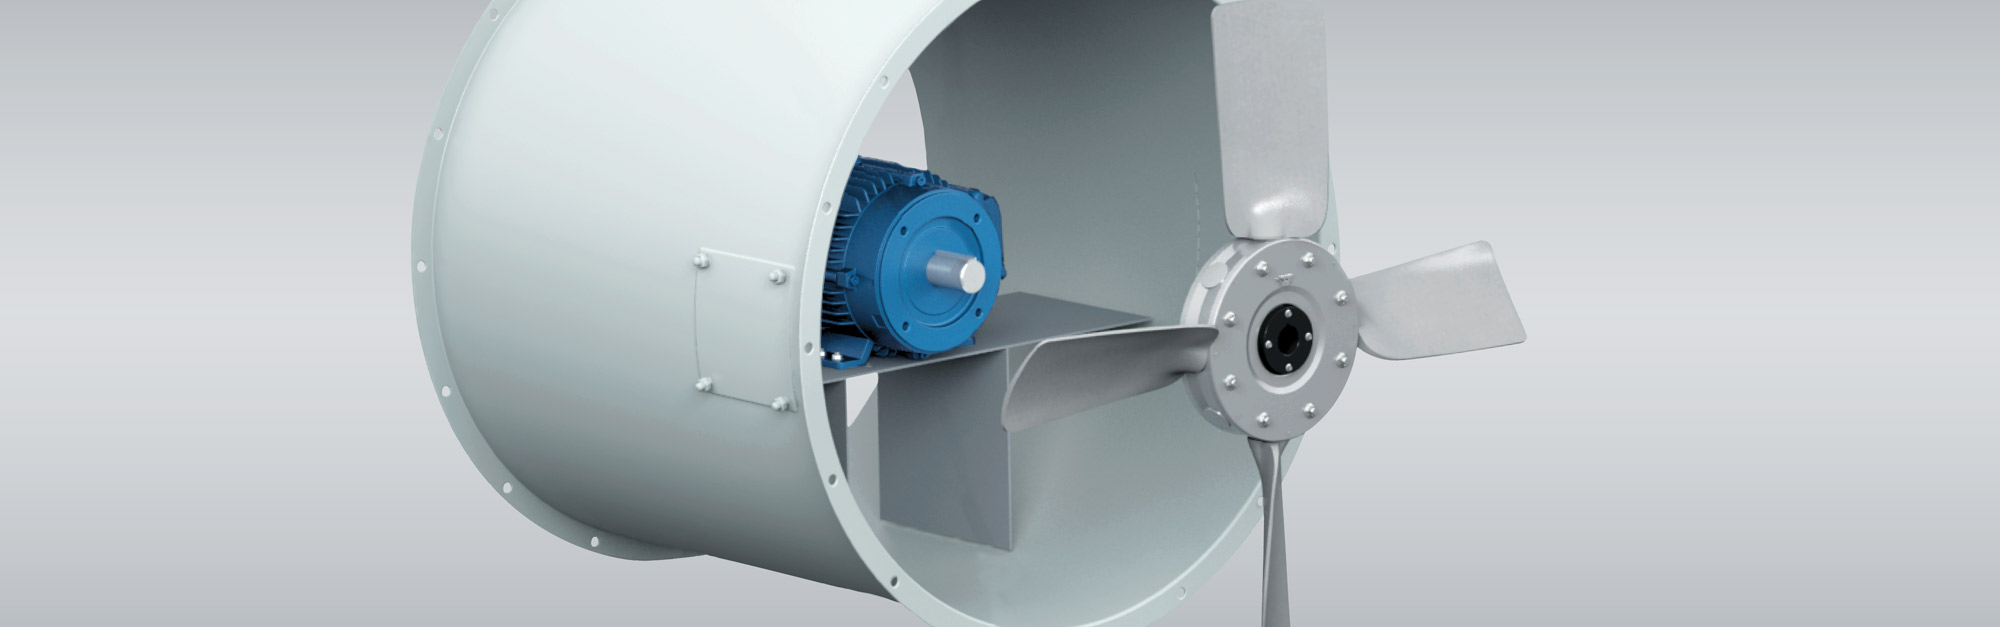   We supply an extensive range of commercial &amp; industrial fans.    Enquire Now  